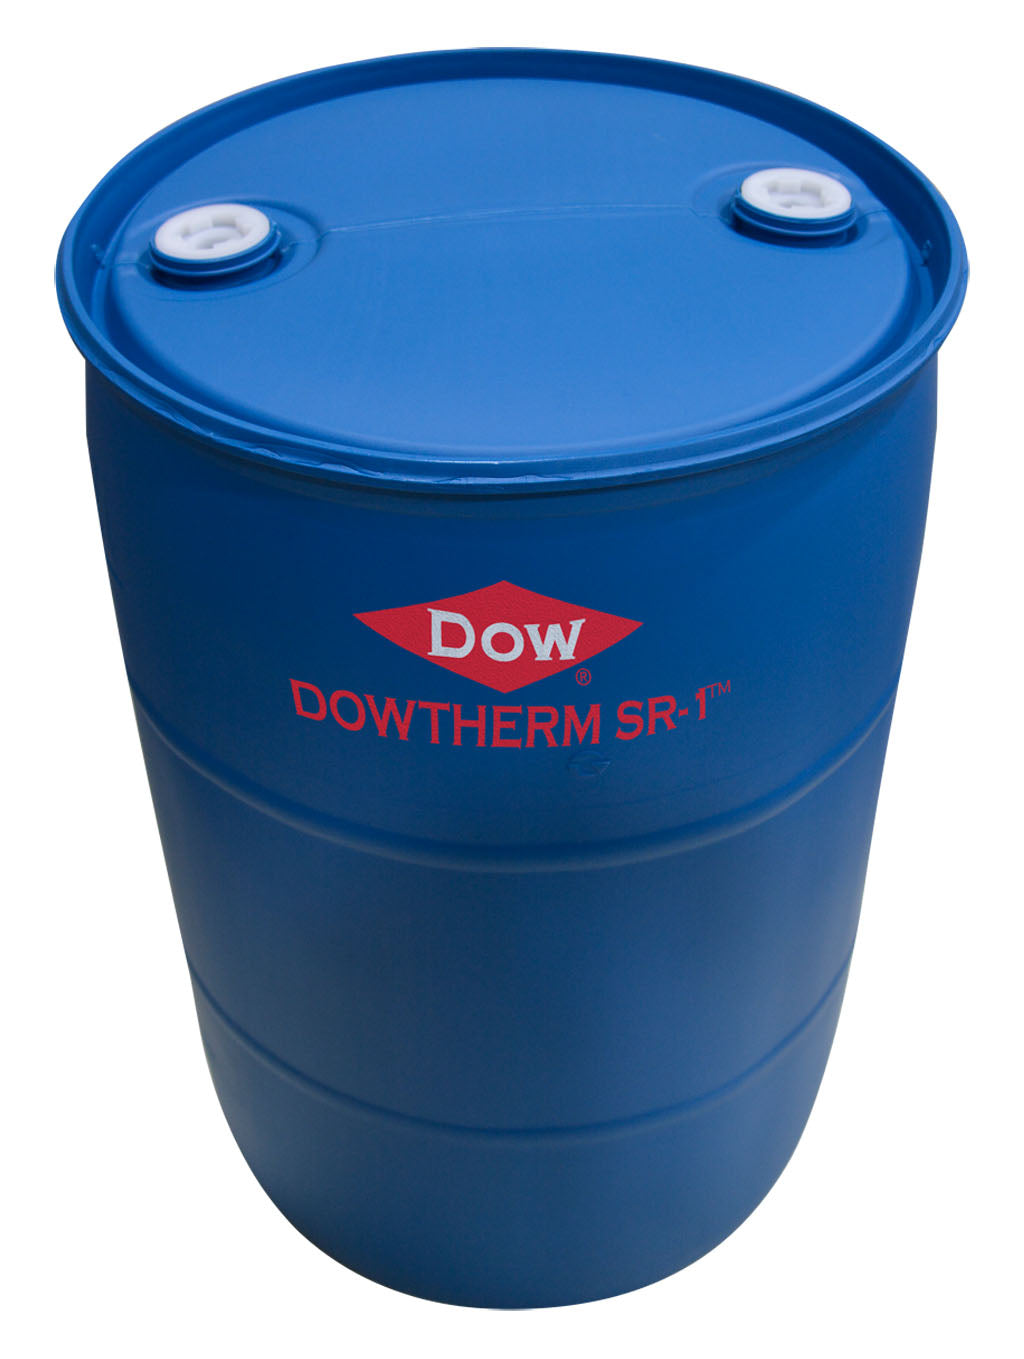 DOWTHERM SR 1 Inhibited Ethylene Glycol in a 55 Gallon Drum.